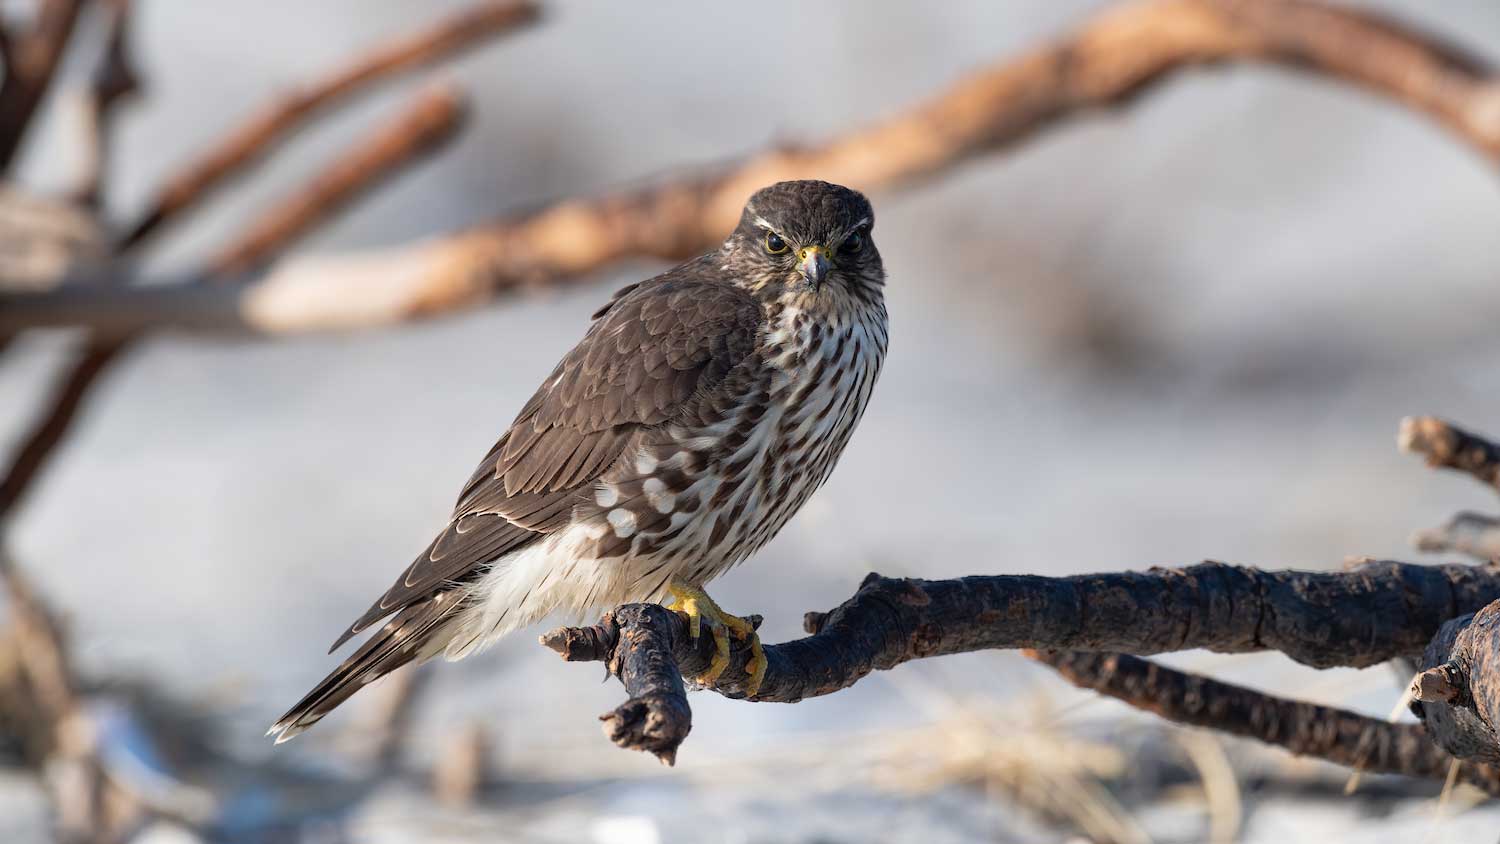 A merlin falcon perched on a branch.